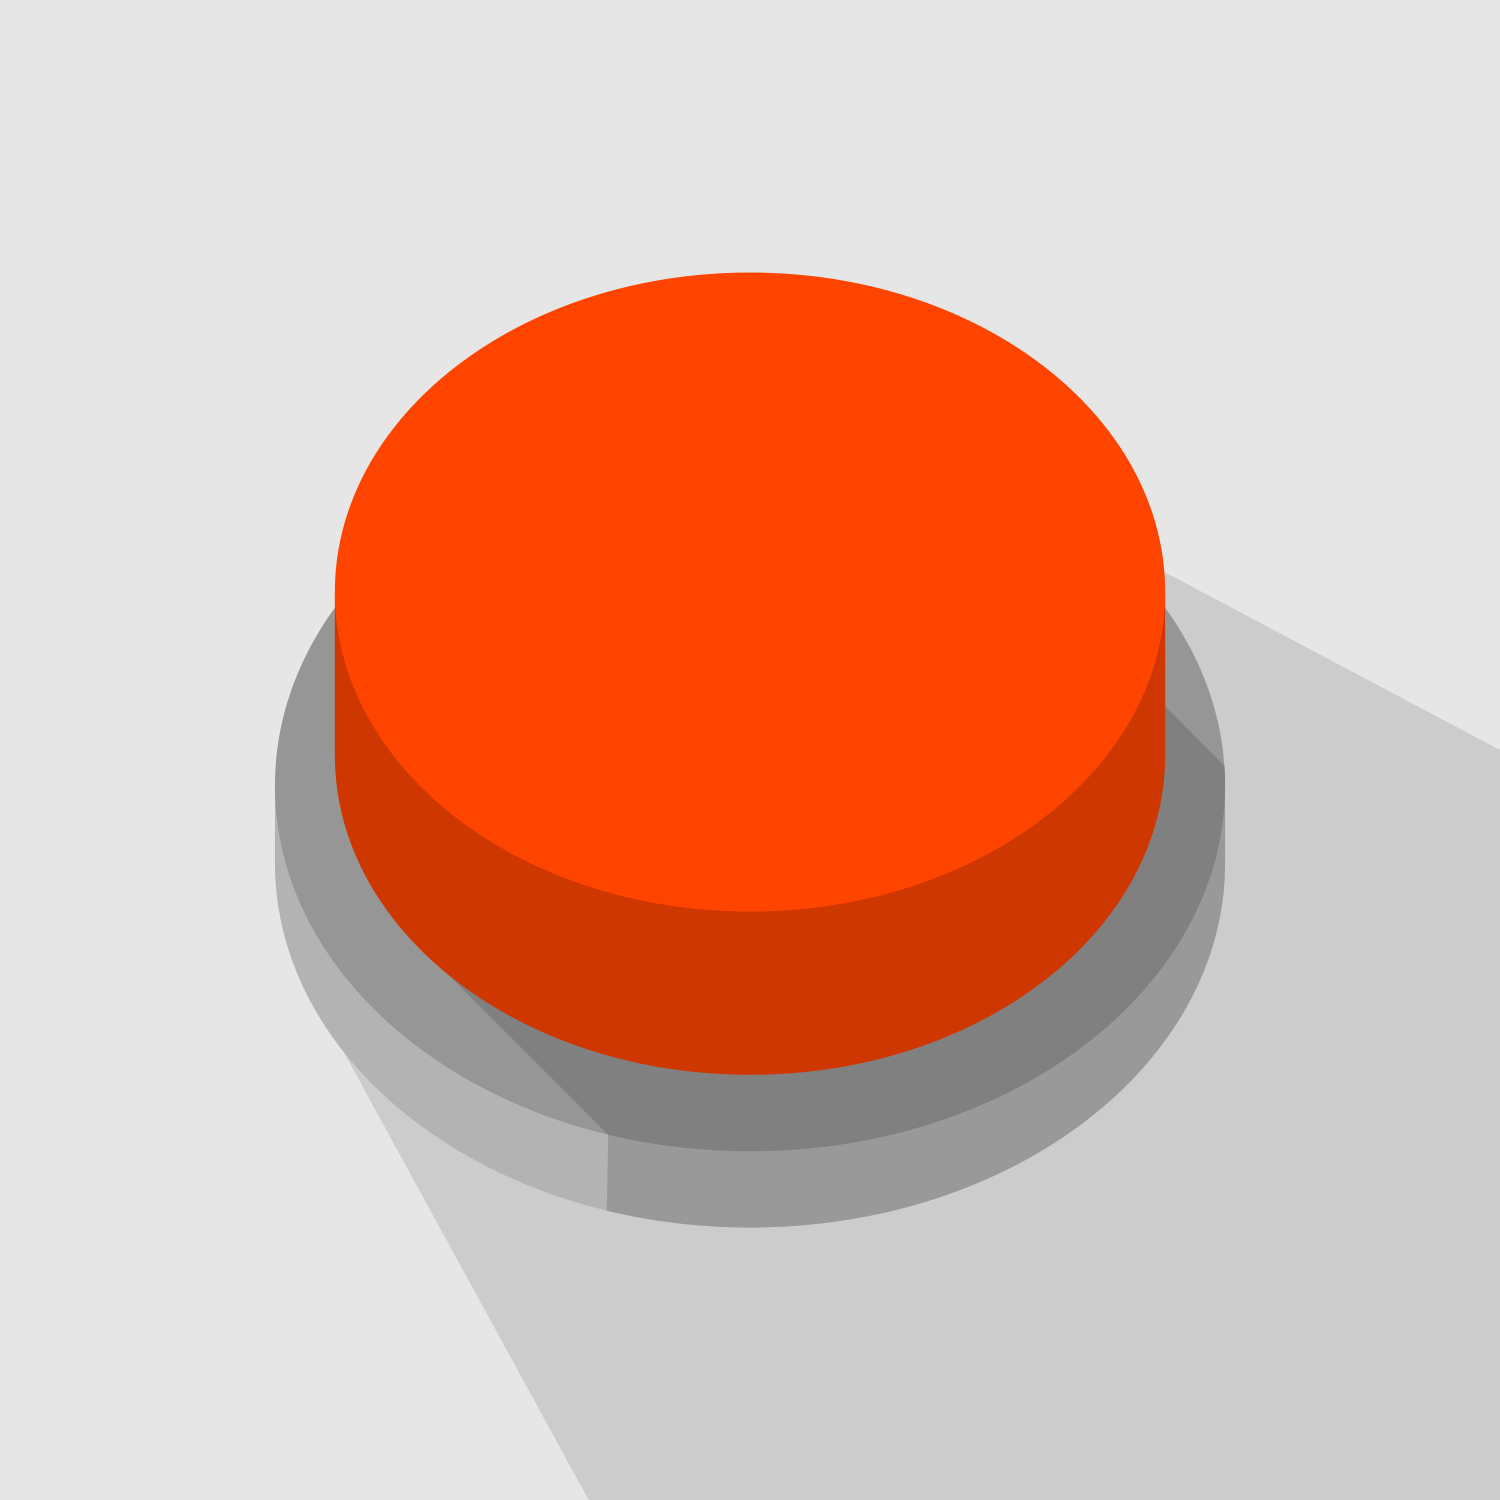 Red Button 5.97 download the last version for windows